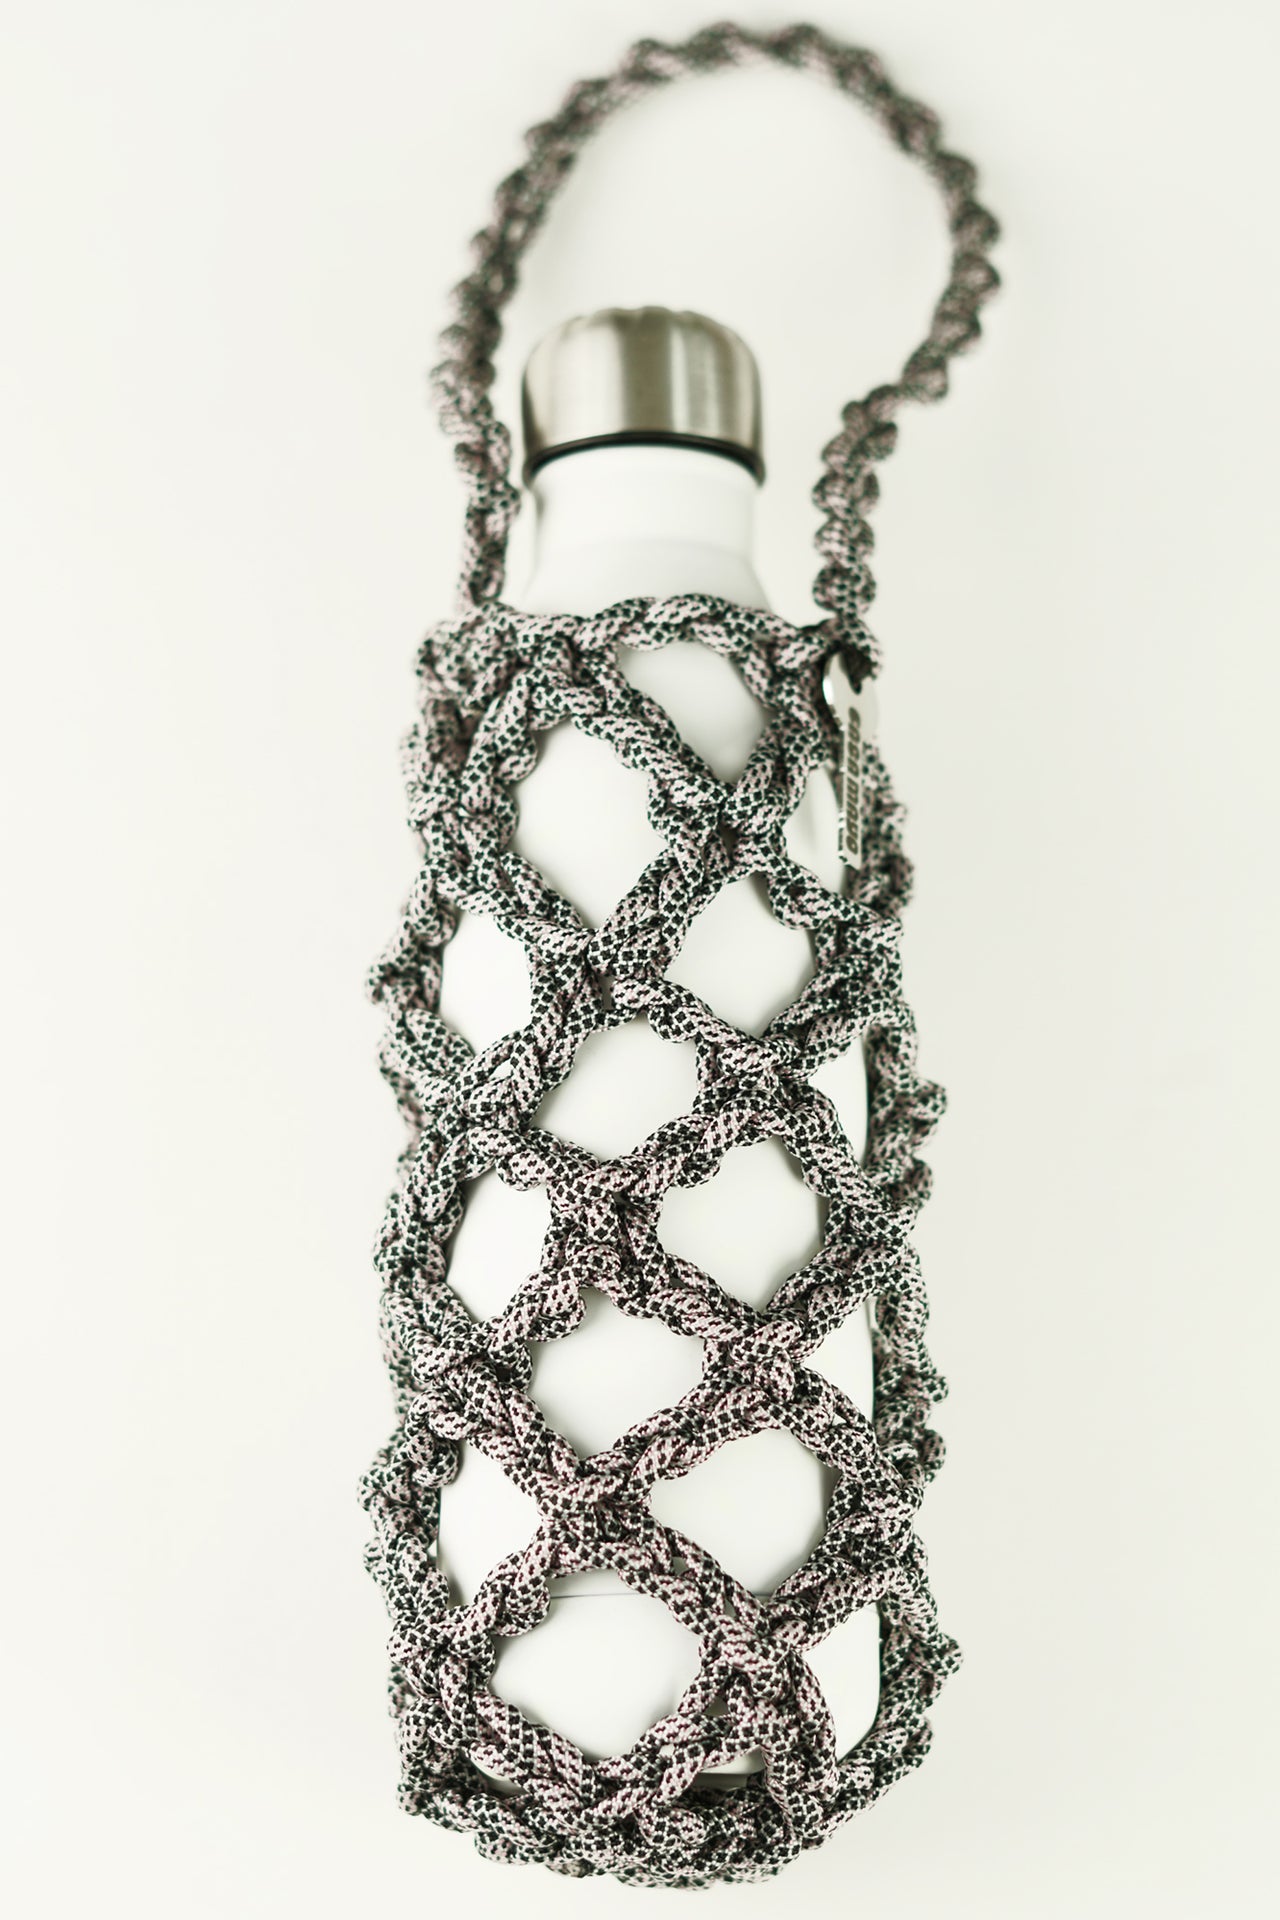 Black and white bottle porter made of paracord rope